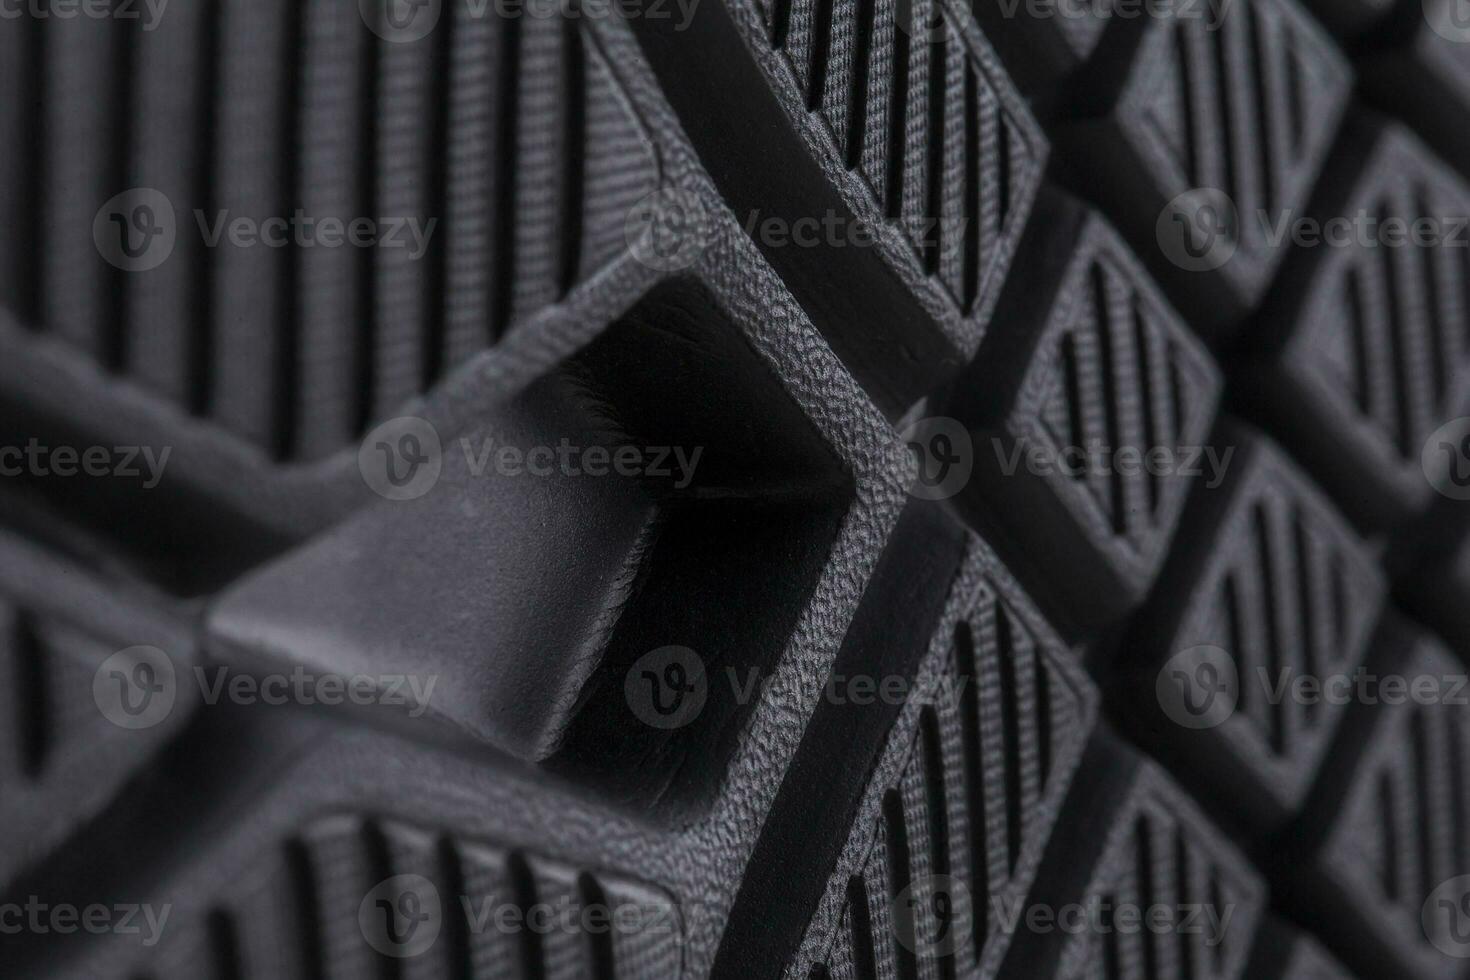 Fragment of a rubber black sole sneaker. Bottom of sports shoes photo